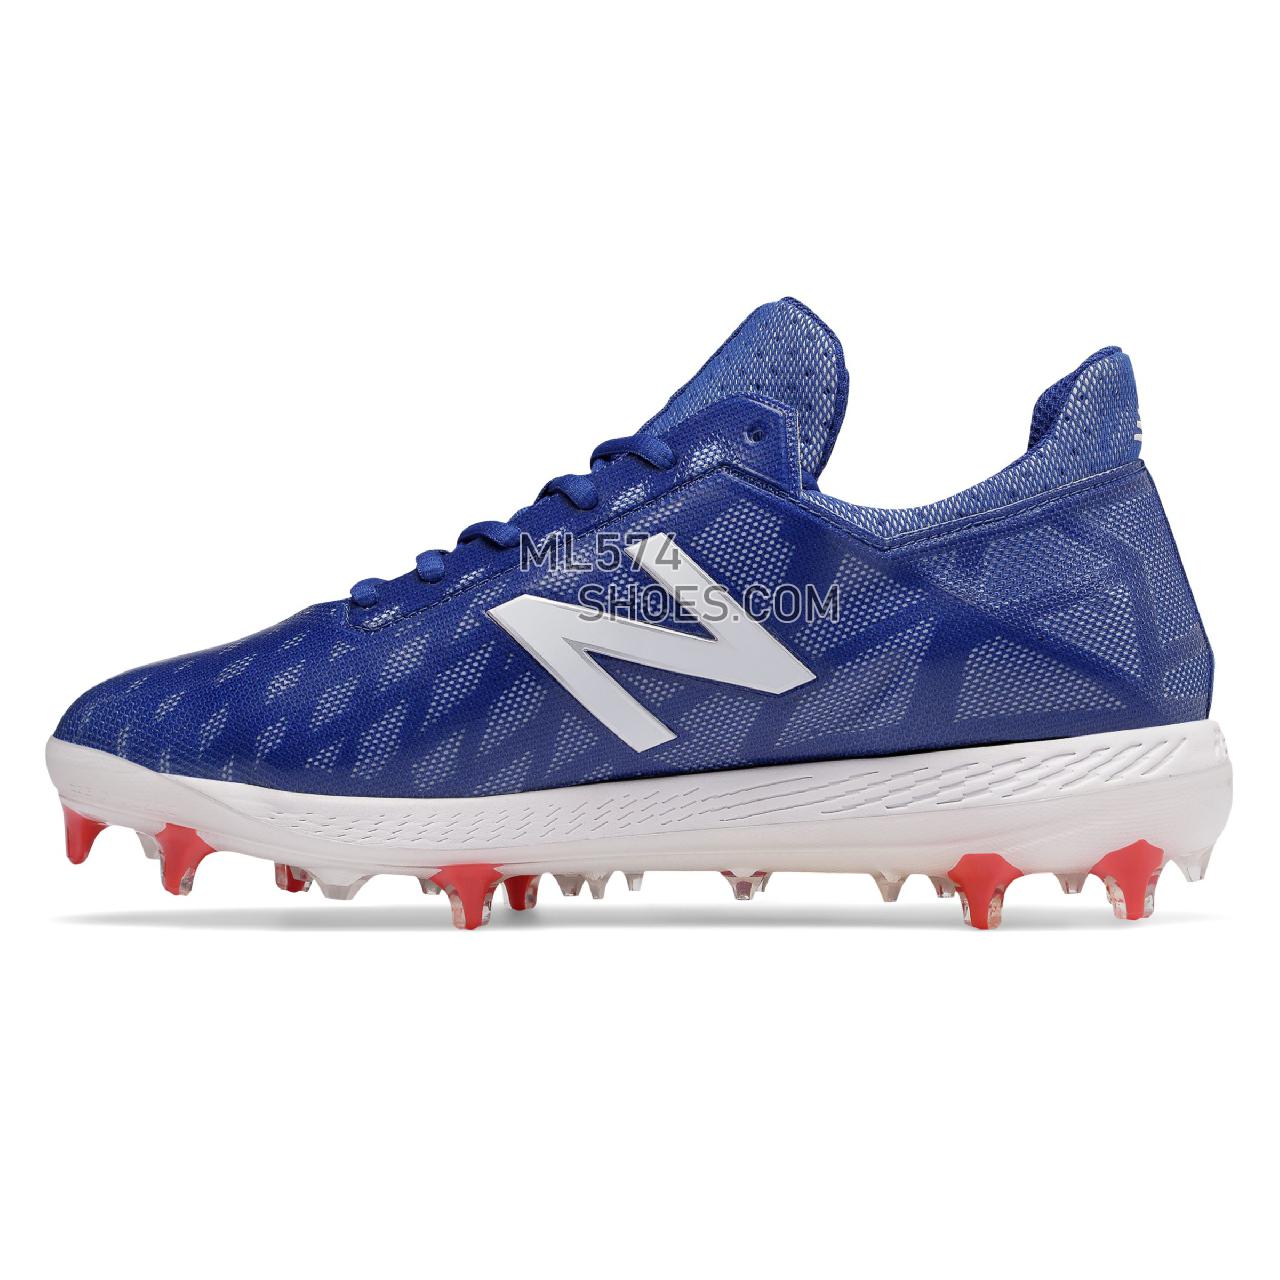 New Balance COMPv1 - Men's 1 - Baseball Blue with White and Red - COMPTB1